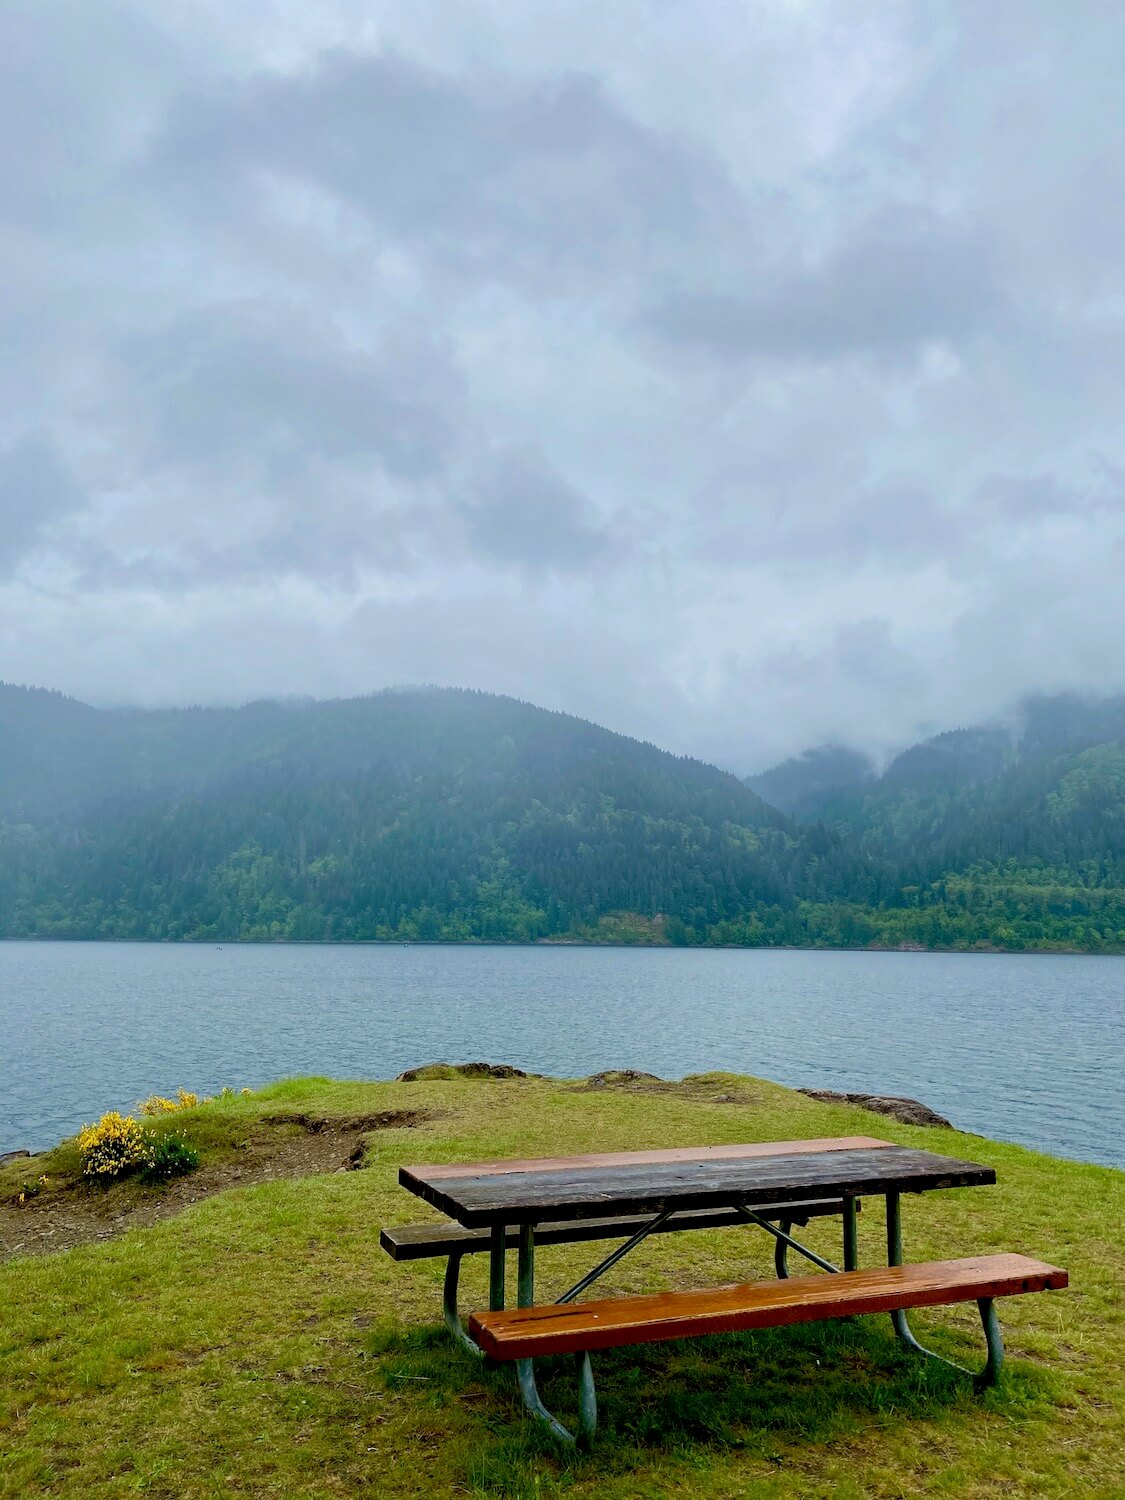 The lakes formed by reservoirs along the Lewis River provide plenty of locations for water recreation, including this park bench made from wood and metal that sits right on the edge of the water bank and on top of short green park grass.  There are small yellow flowers in bunches and the mist is rising from the dense fir forest on the other side of the lake.  